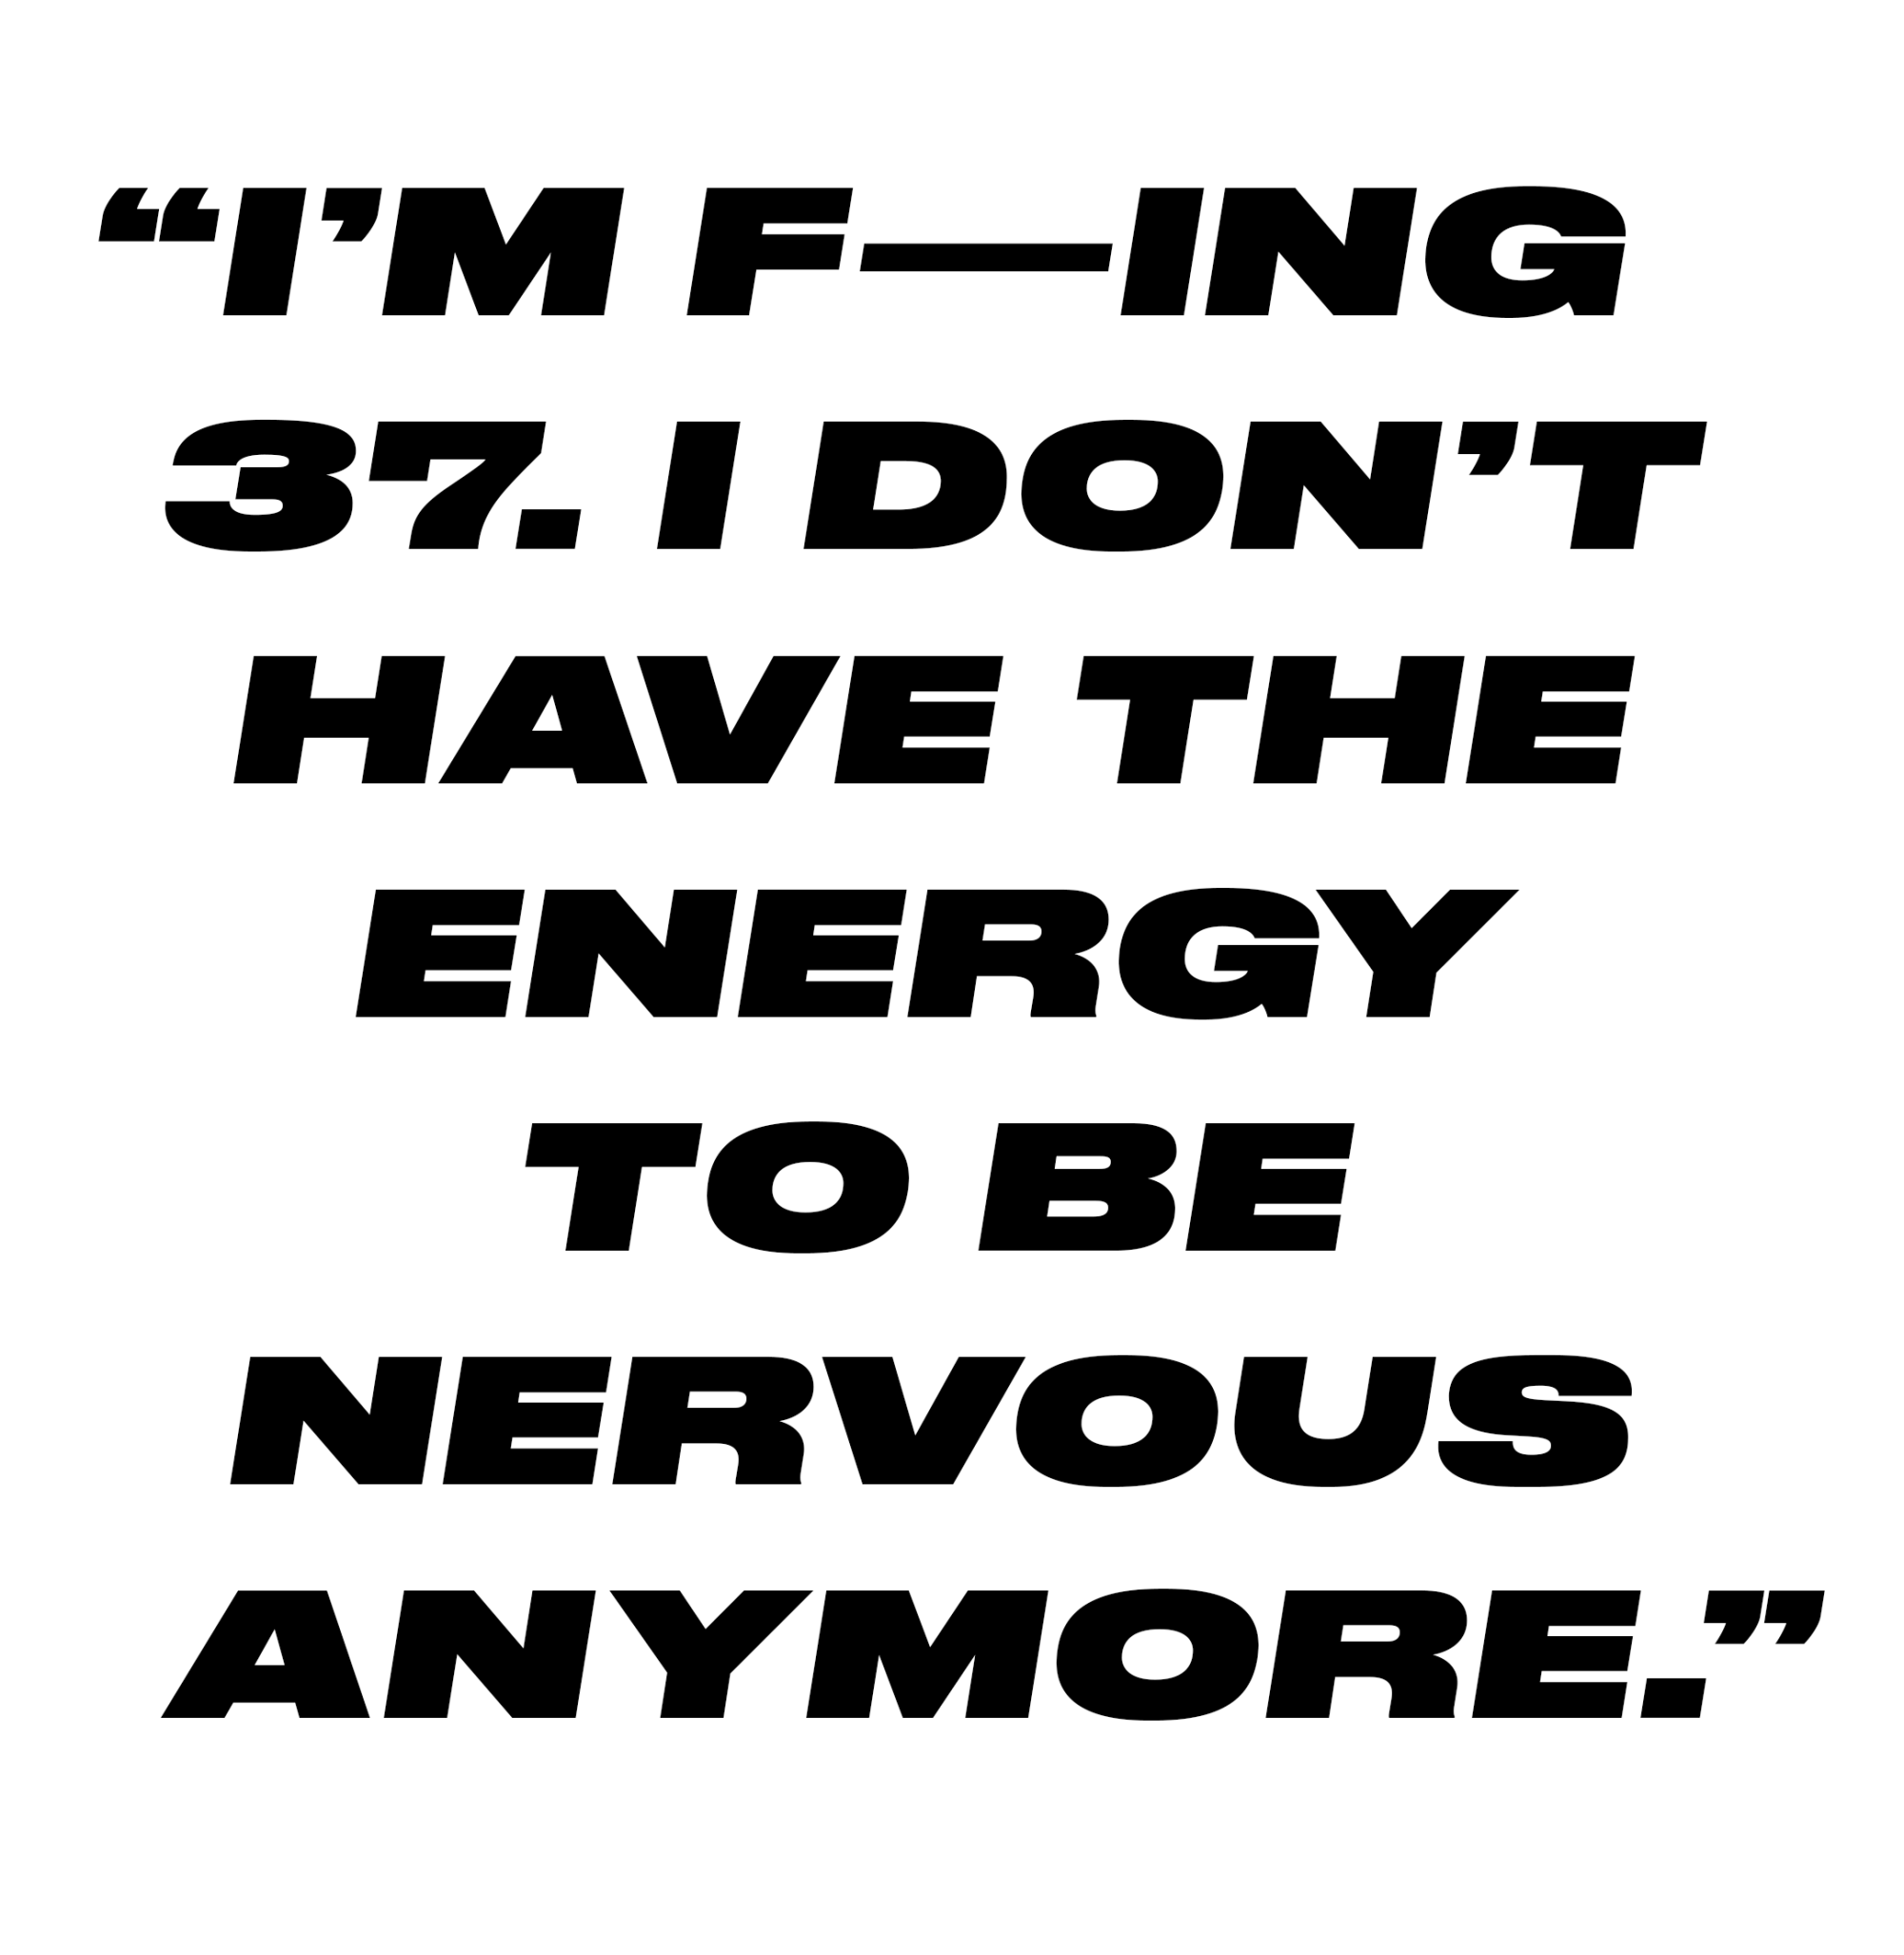 “I’m f—ing 37. I don’t have the energy to be nervous anymore."